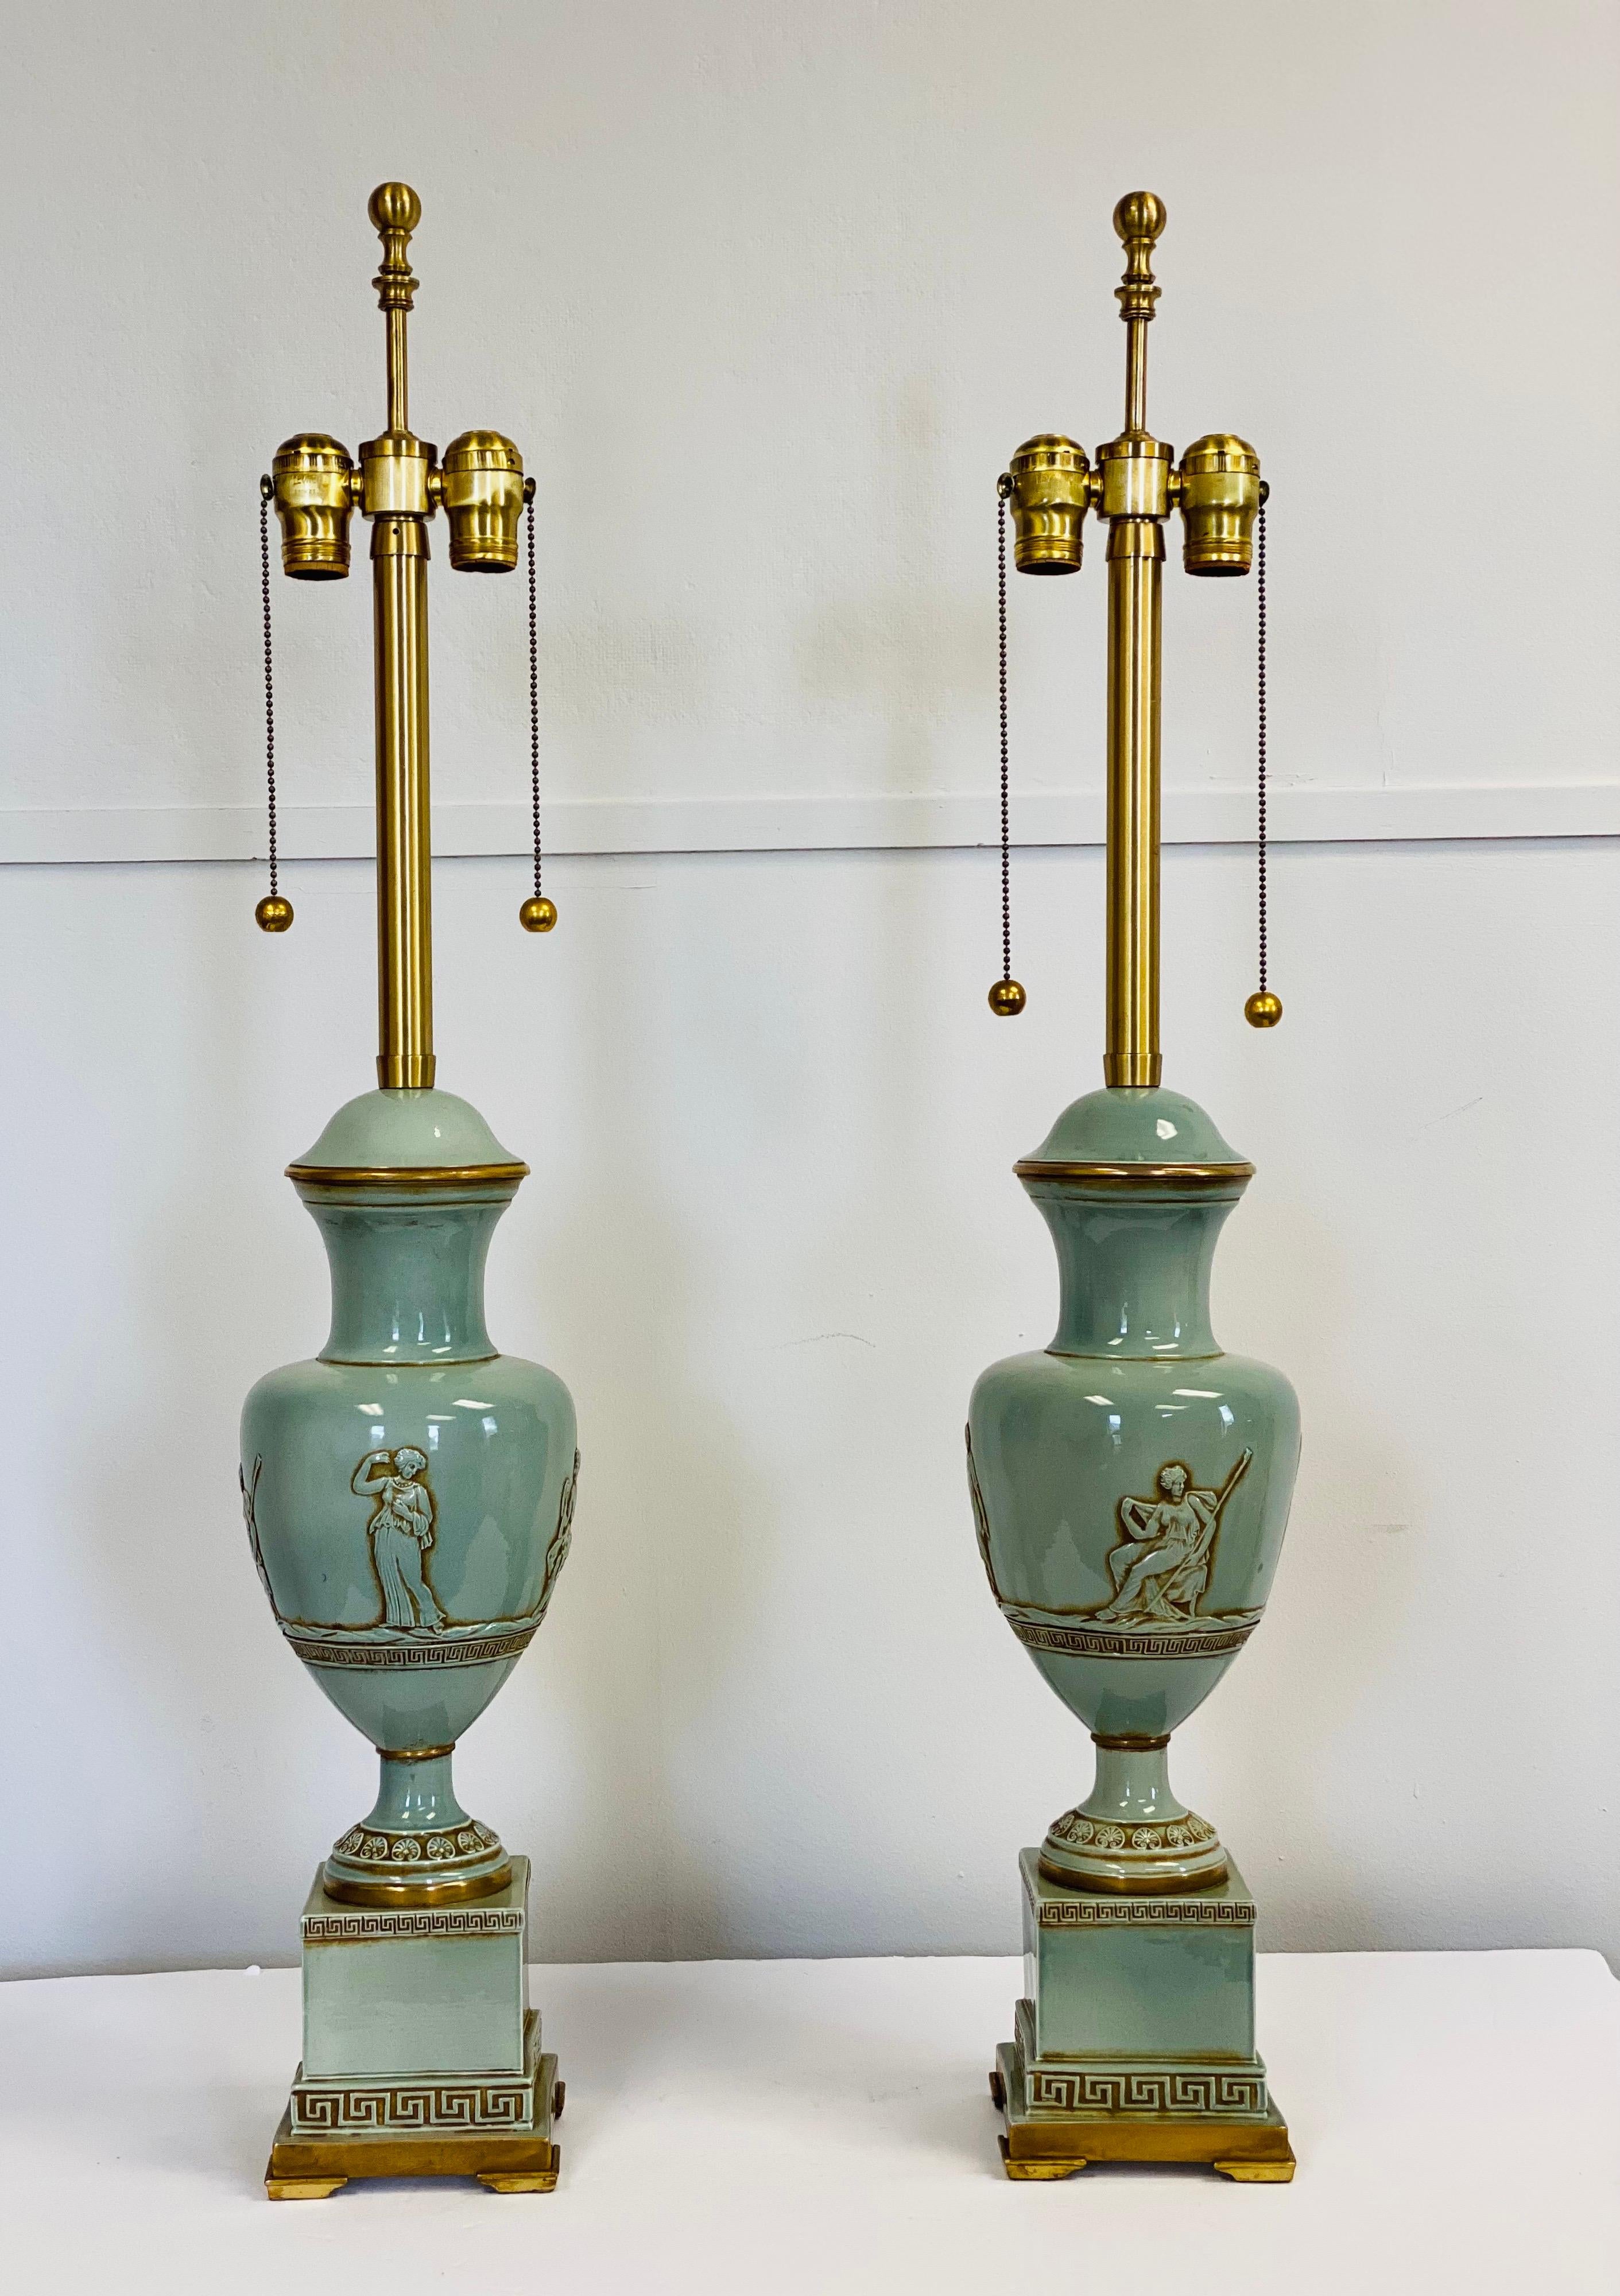 We are very pleased to offer an exquisite pair of lamps by The Marbro Lamp Company, circa the 1960s. A Classic ceramic urn profile with a glossy sage glaze is mounted on a square plinth with beautiful Greek key motif. Eye-catching intaglios depict